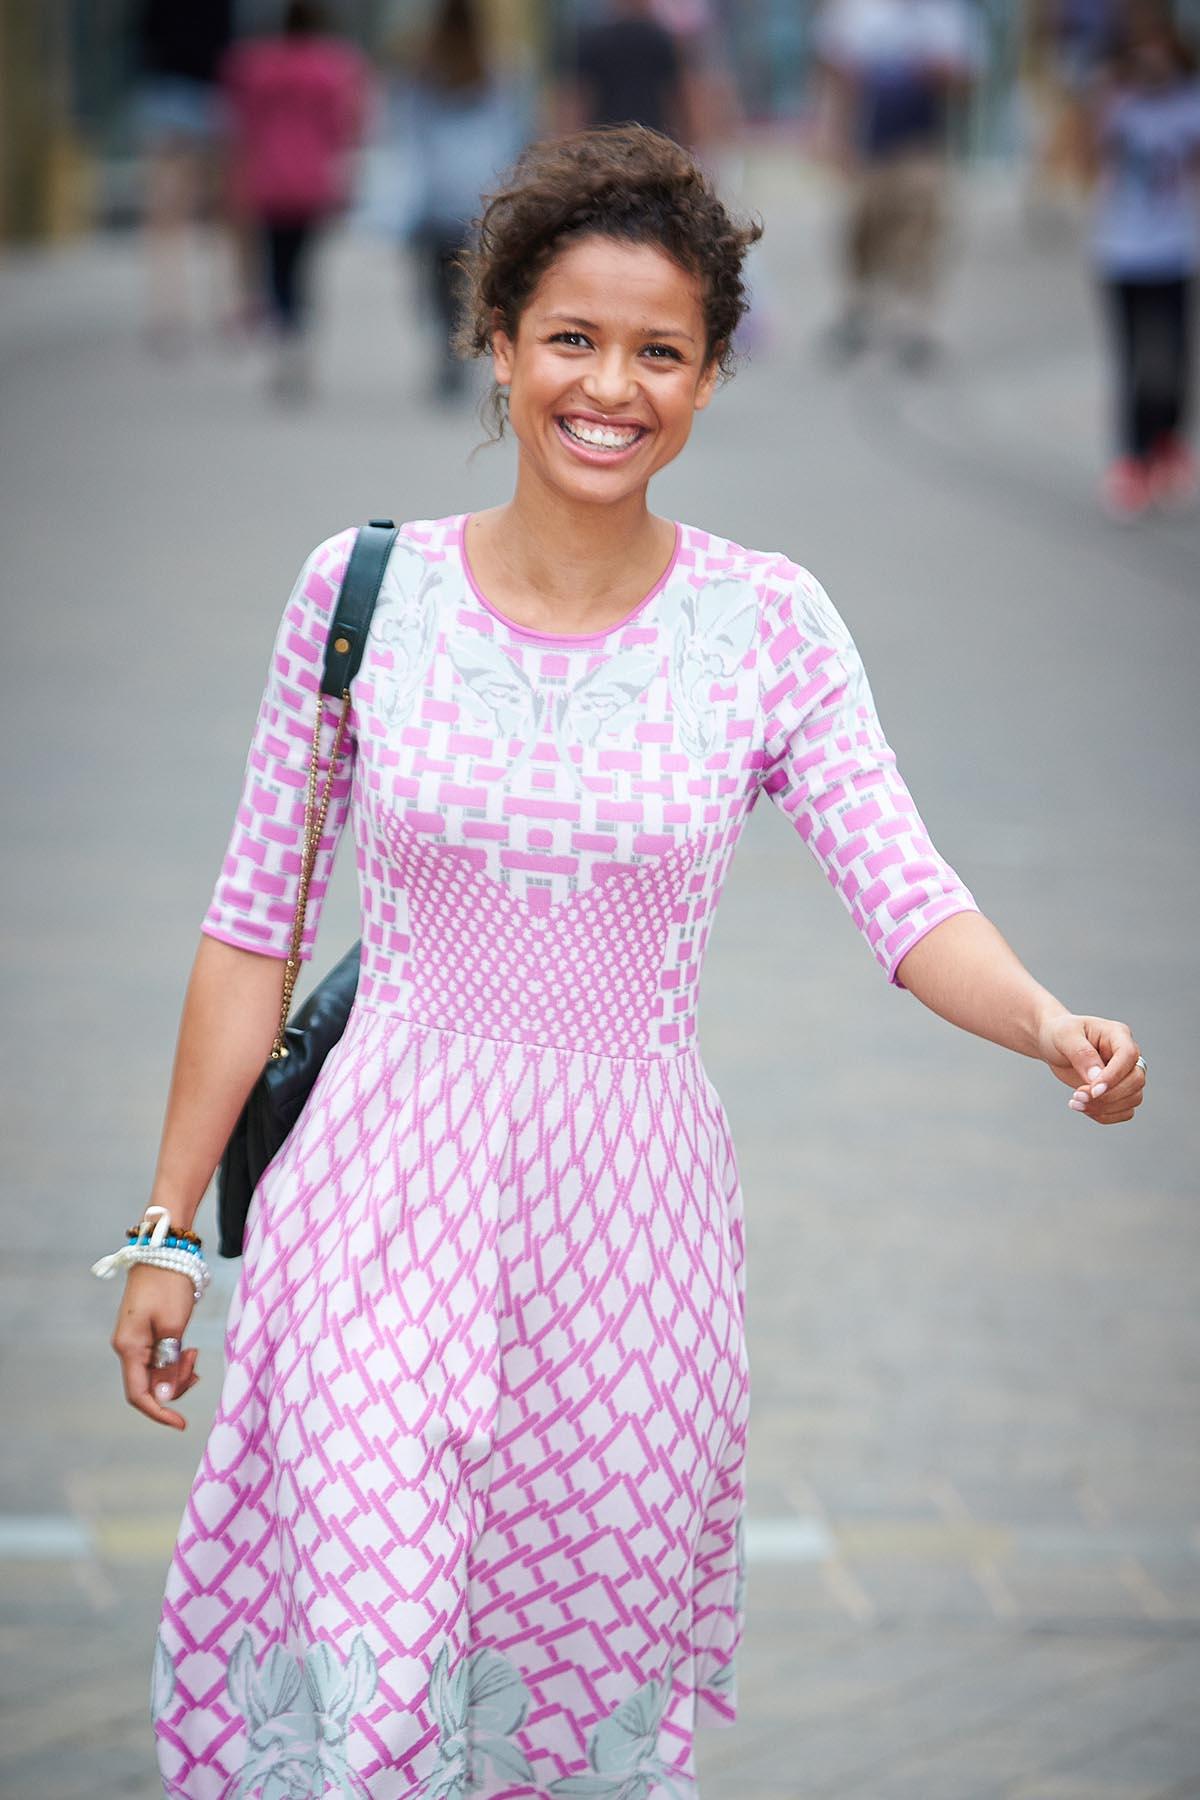 Witney-born actress Gugu Mbatha-Raw returned home on Saturday, June 14, for a special screening of her new movie Belle at the town's Cineworld